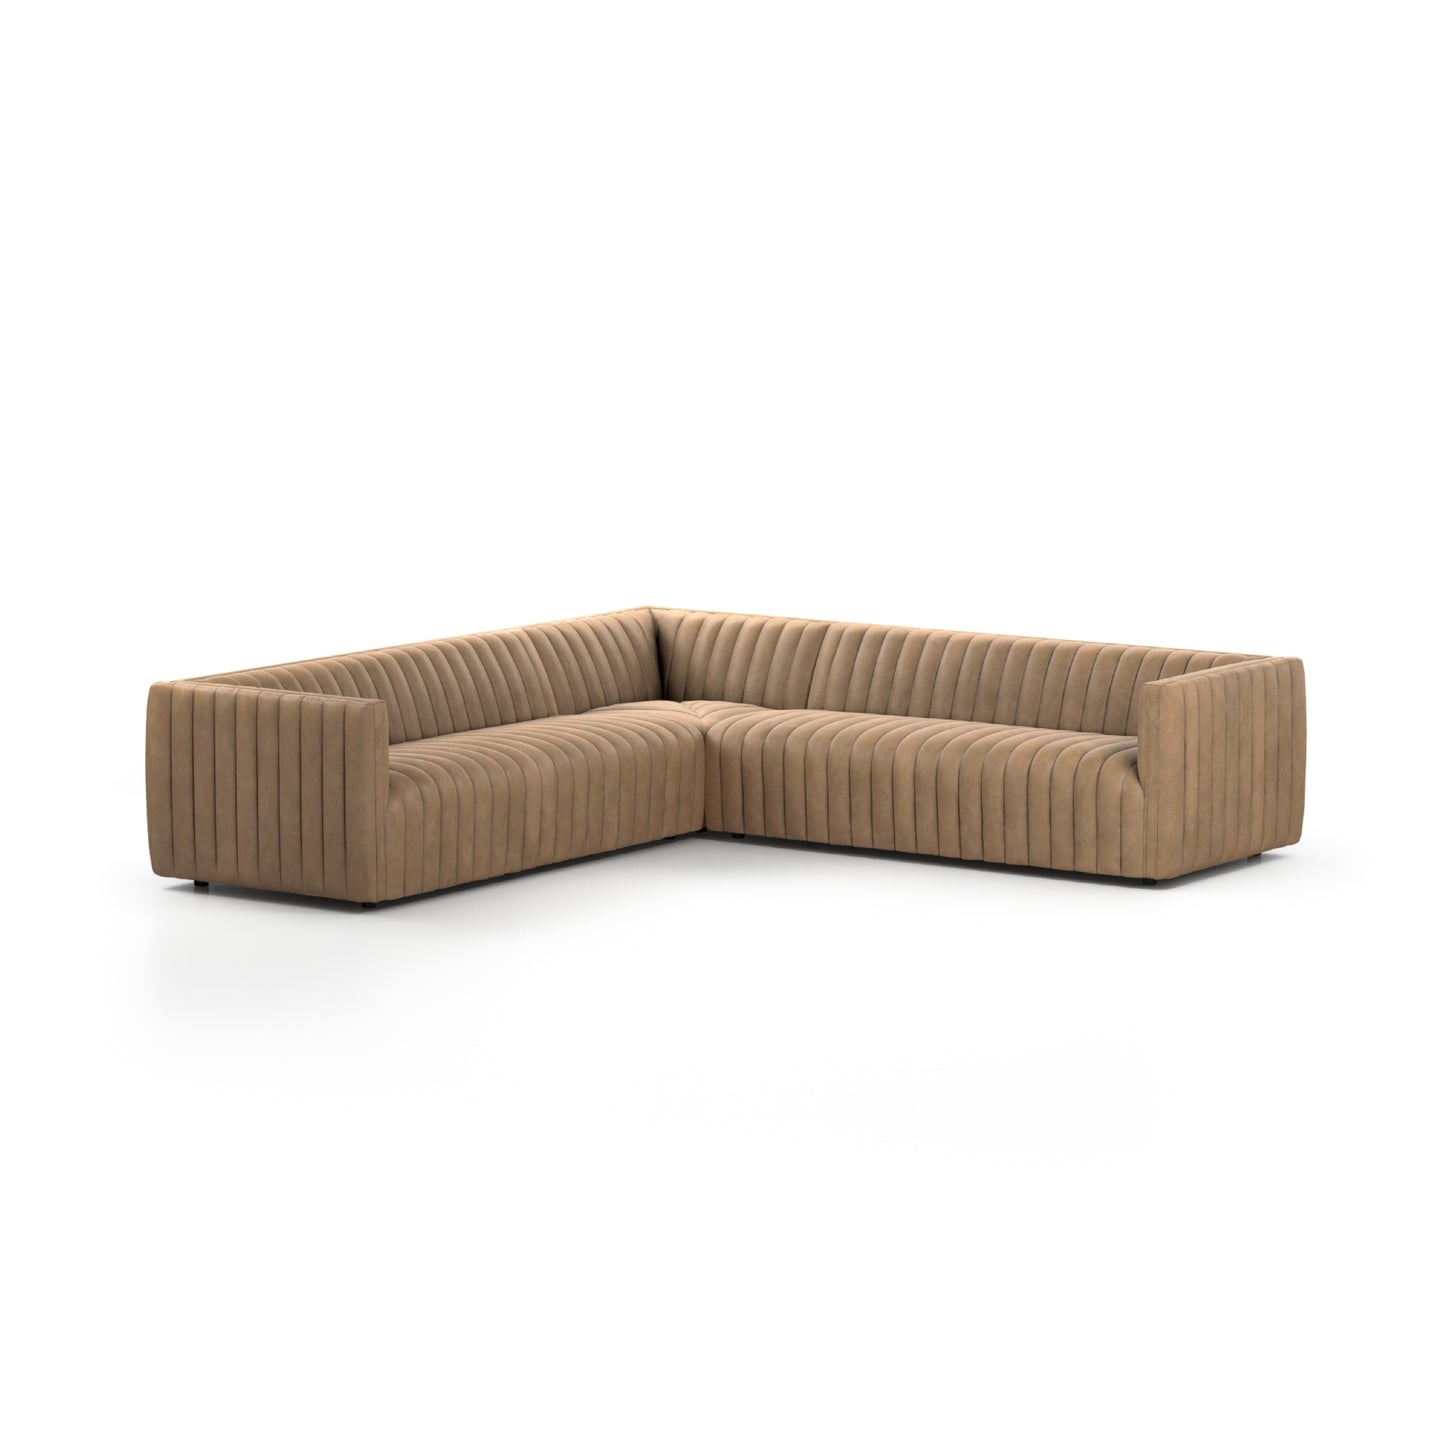 Augustine 3-PC Sectional 105" / Palermo DriftSectional Four Hands  105" Palermo Drift  Four Hands, Mid Century Modern Furniture, Old Bones Furniture Company, Old Bones Co, Modern Mid Century, Designer Furniture, https://www.oldbonesco.com/